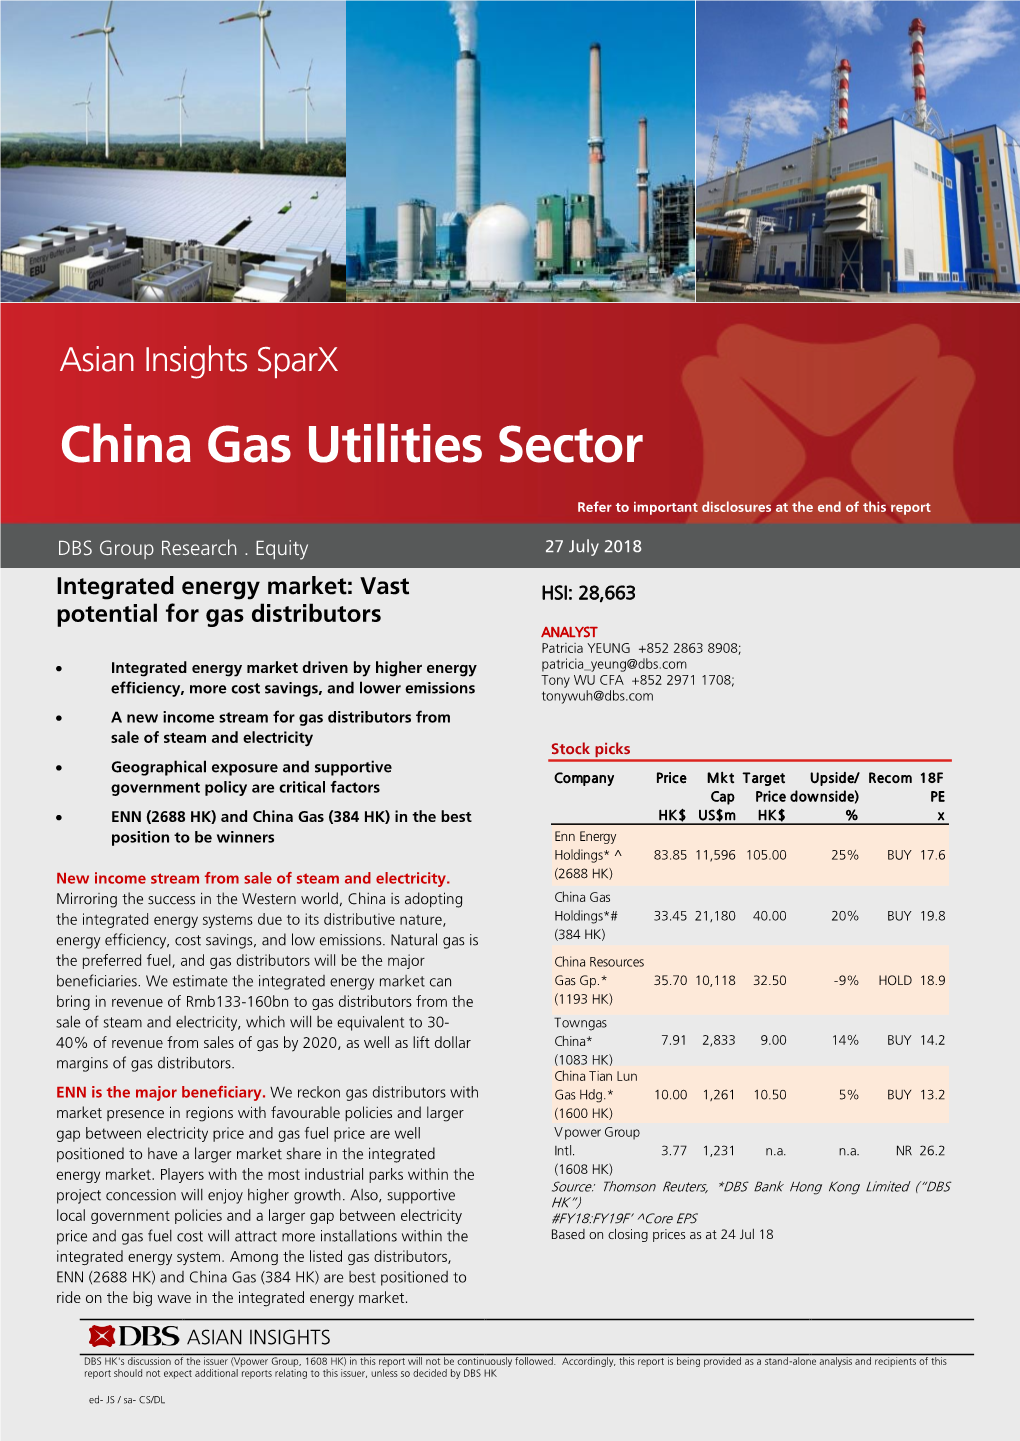 China Gas Utilities Sector